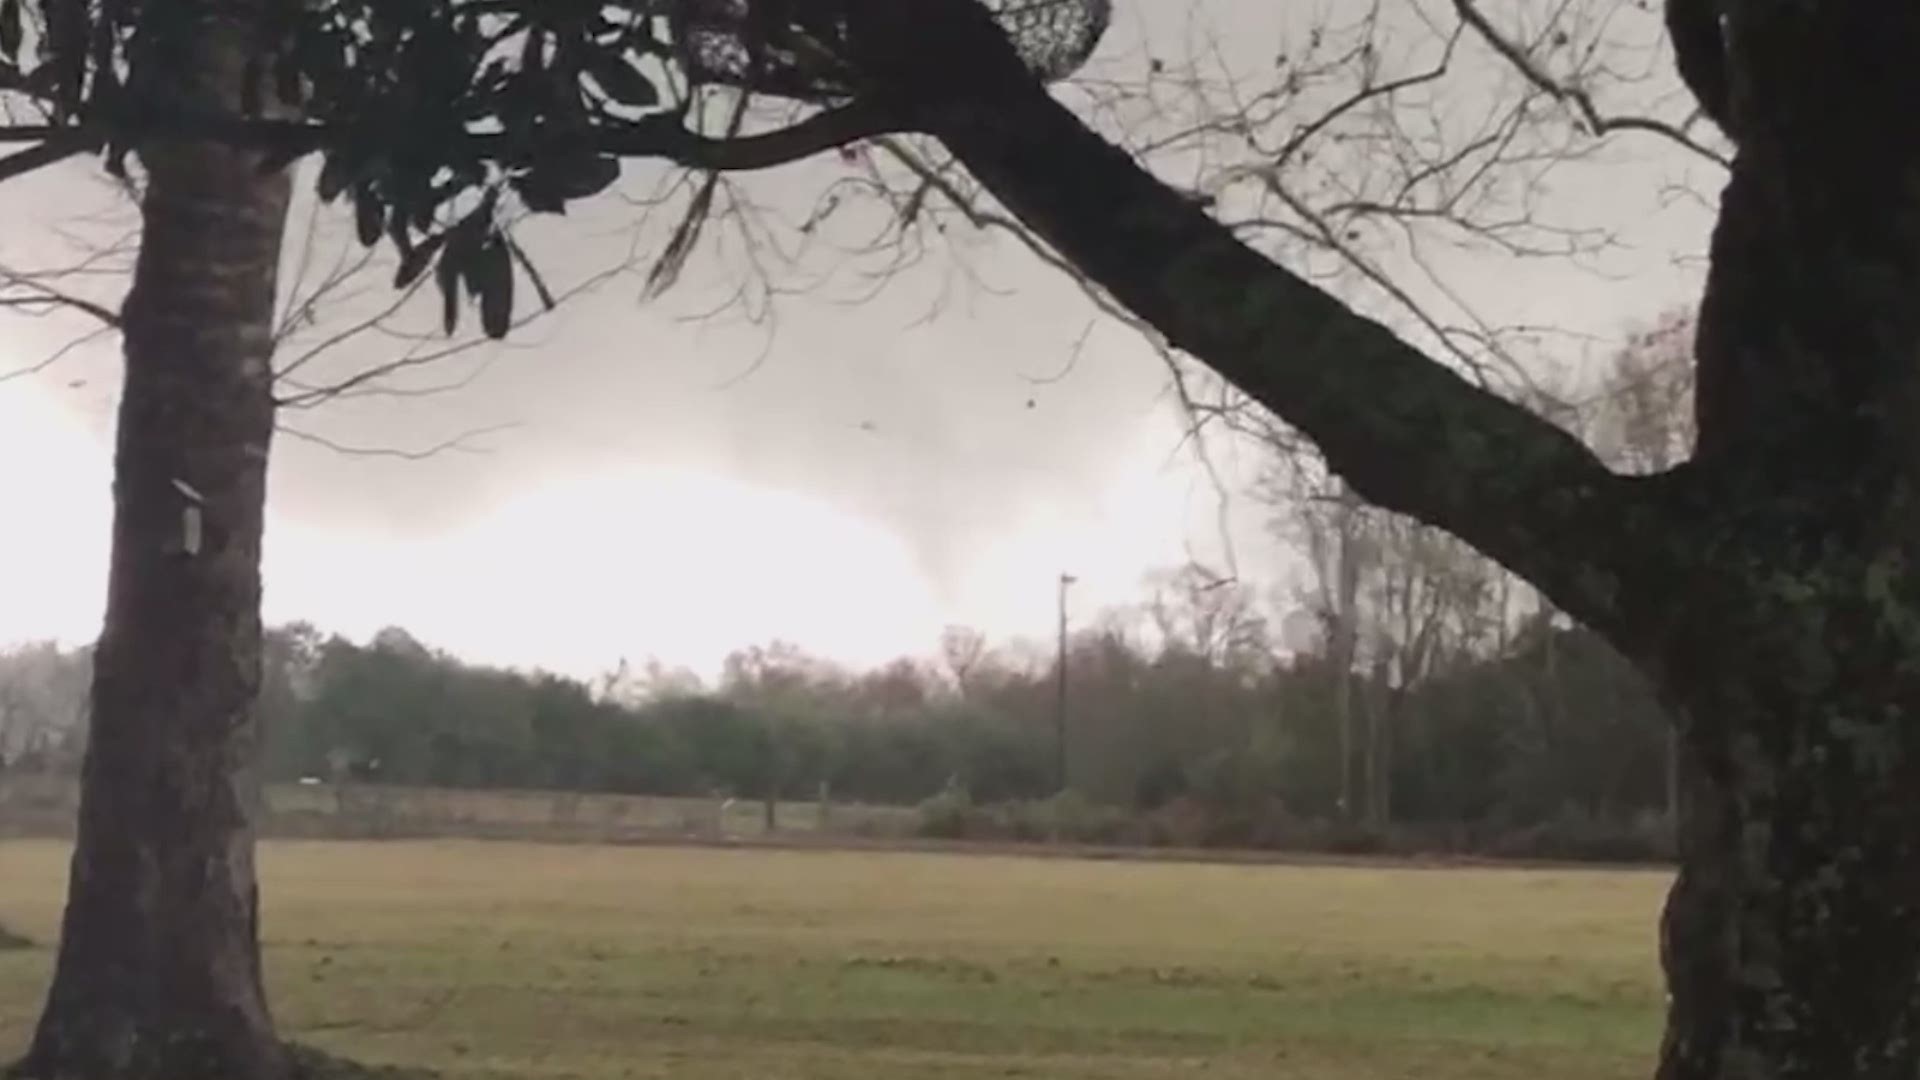 One person was killed in Louisiana as a line of strong storms moved across the state, bringing an apparent tornado.